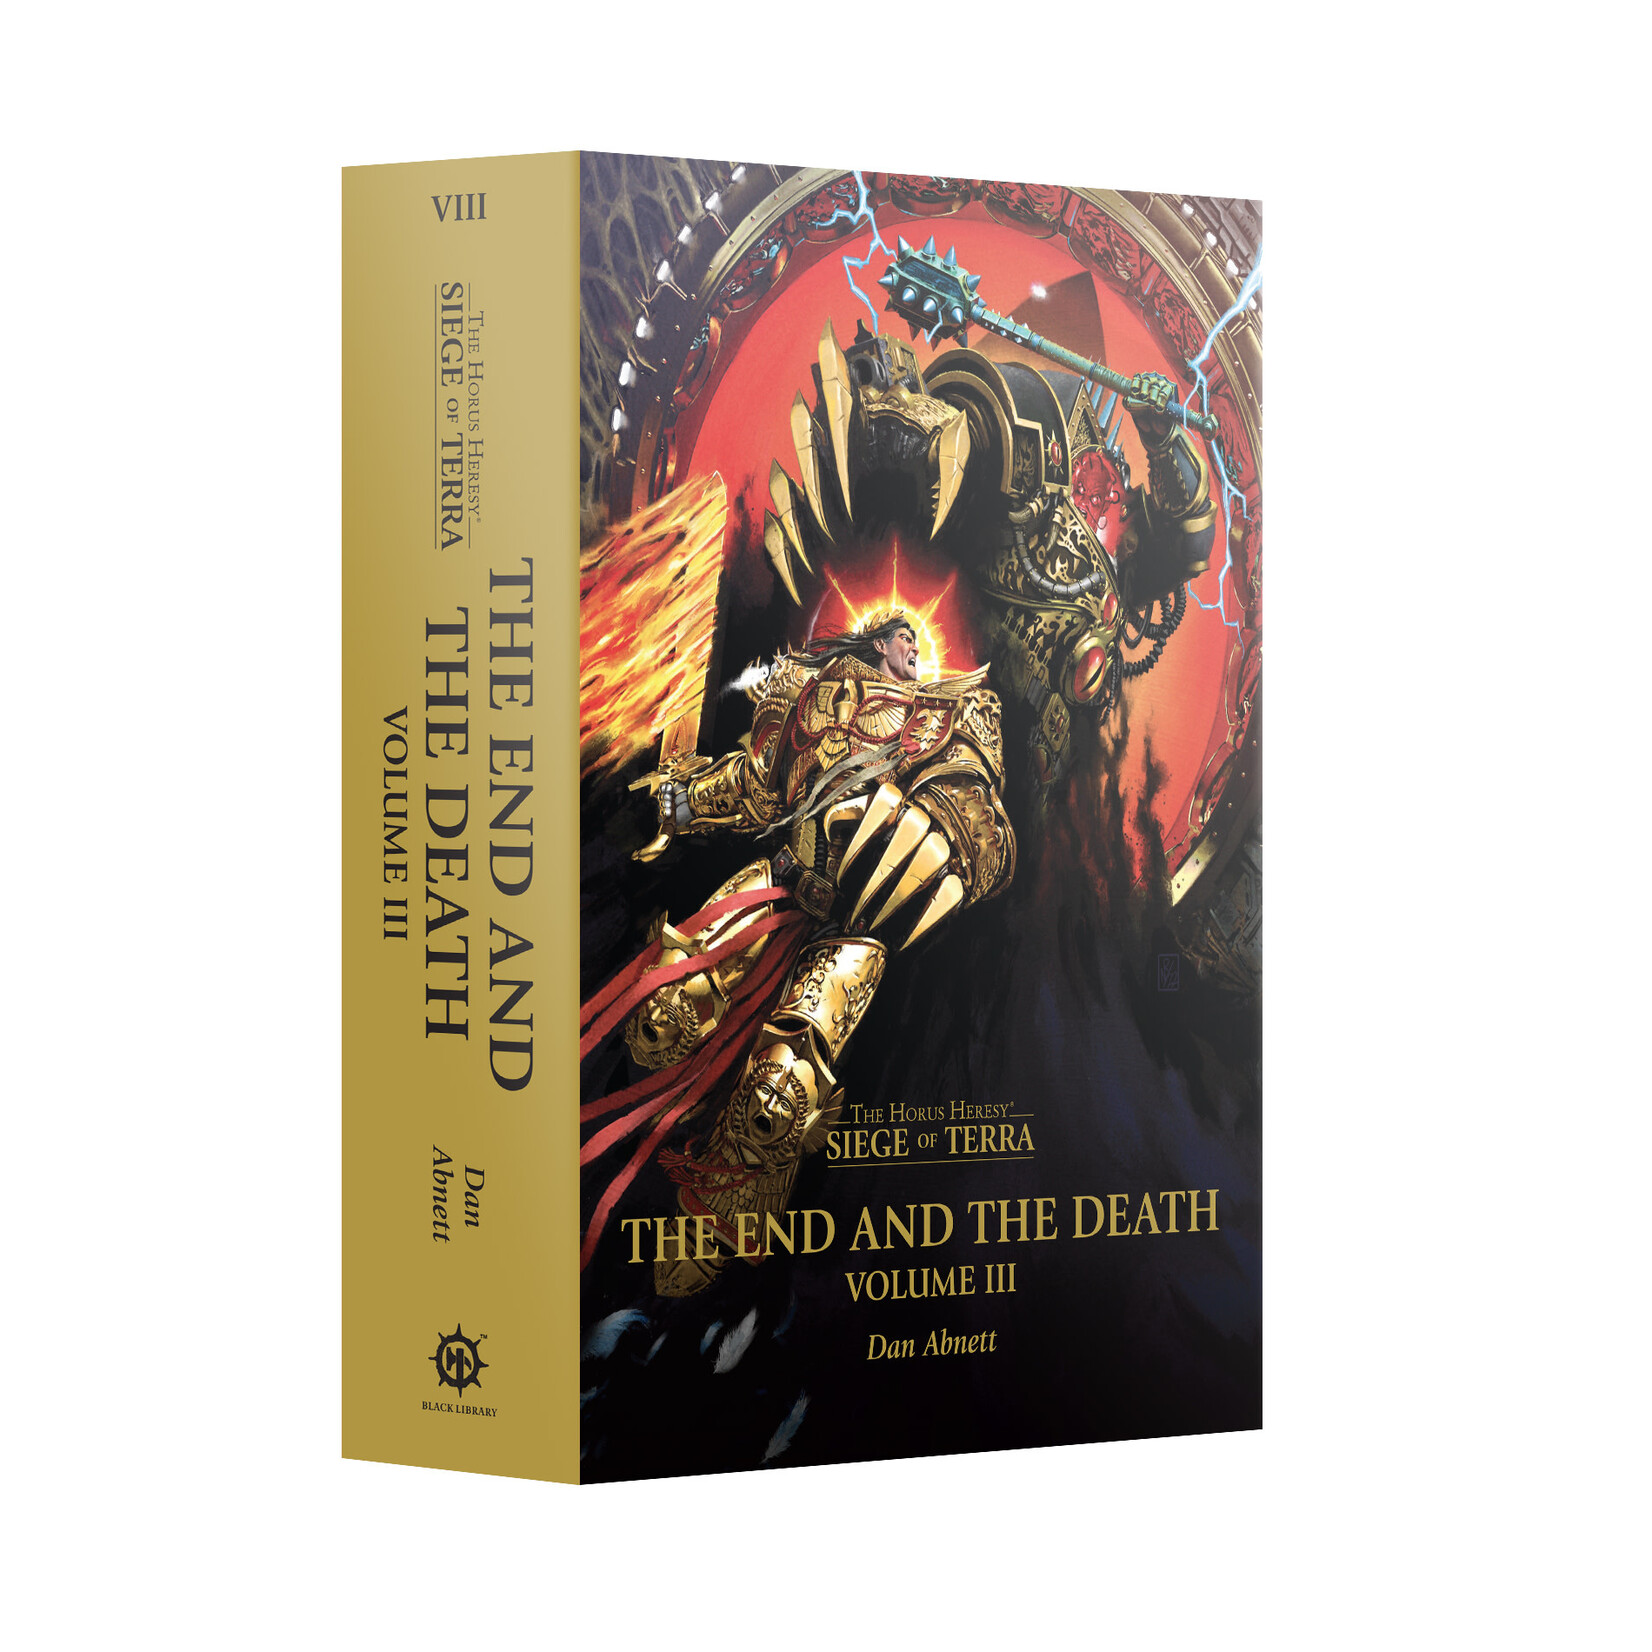 The End and the Death Volume III (Hardback) The Horus Heresy: Seige of Terra Book 8: Part 3